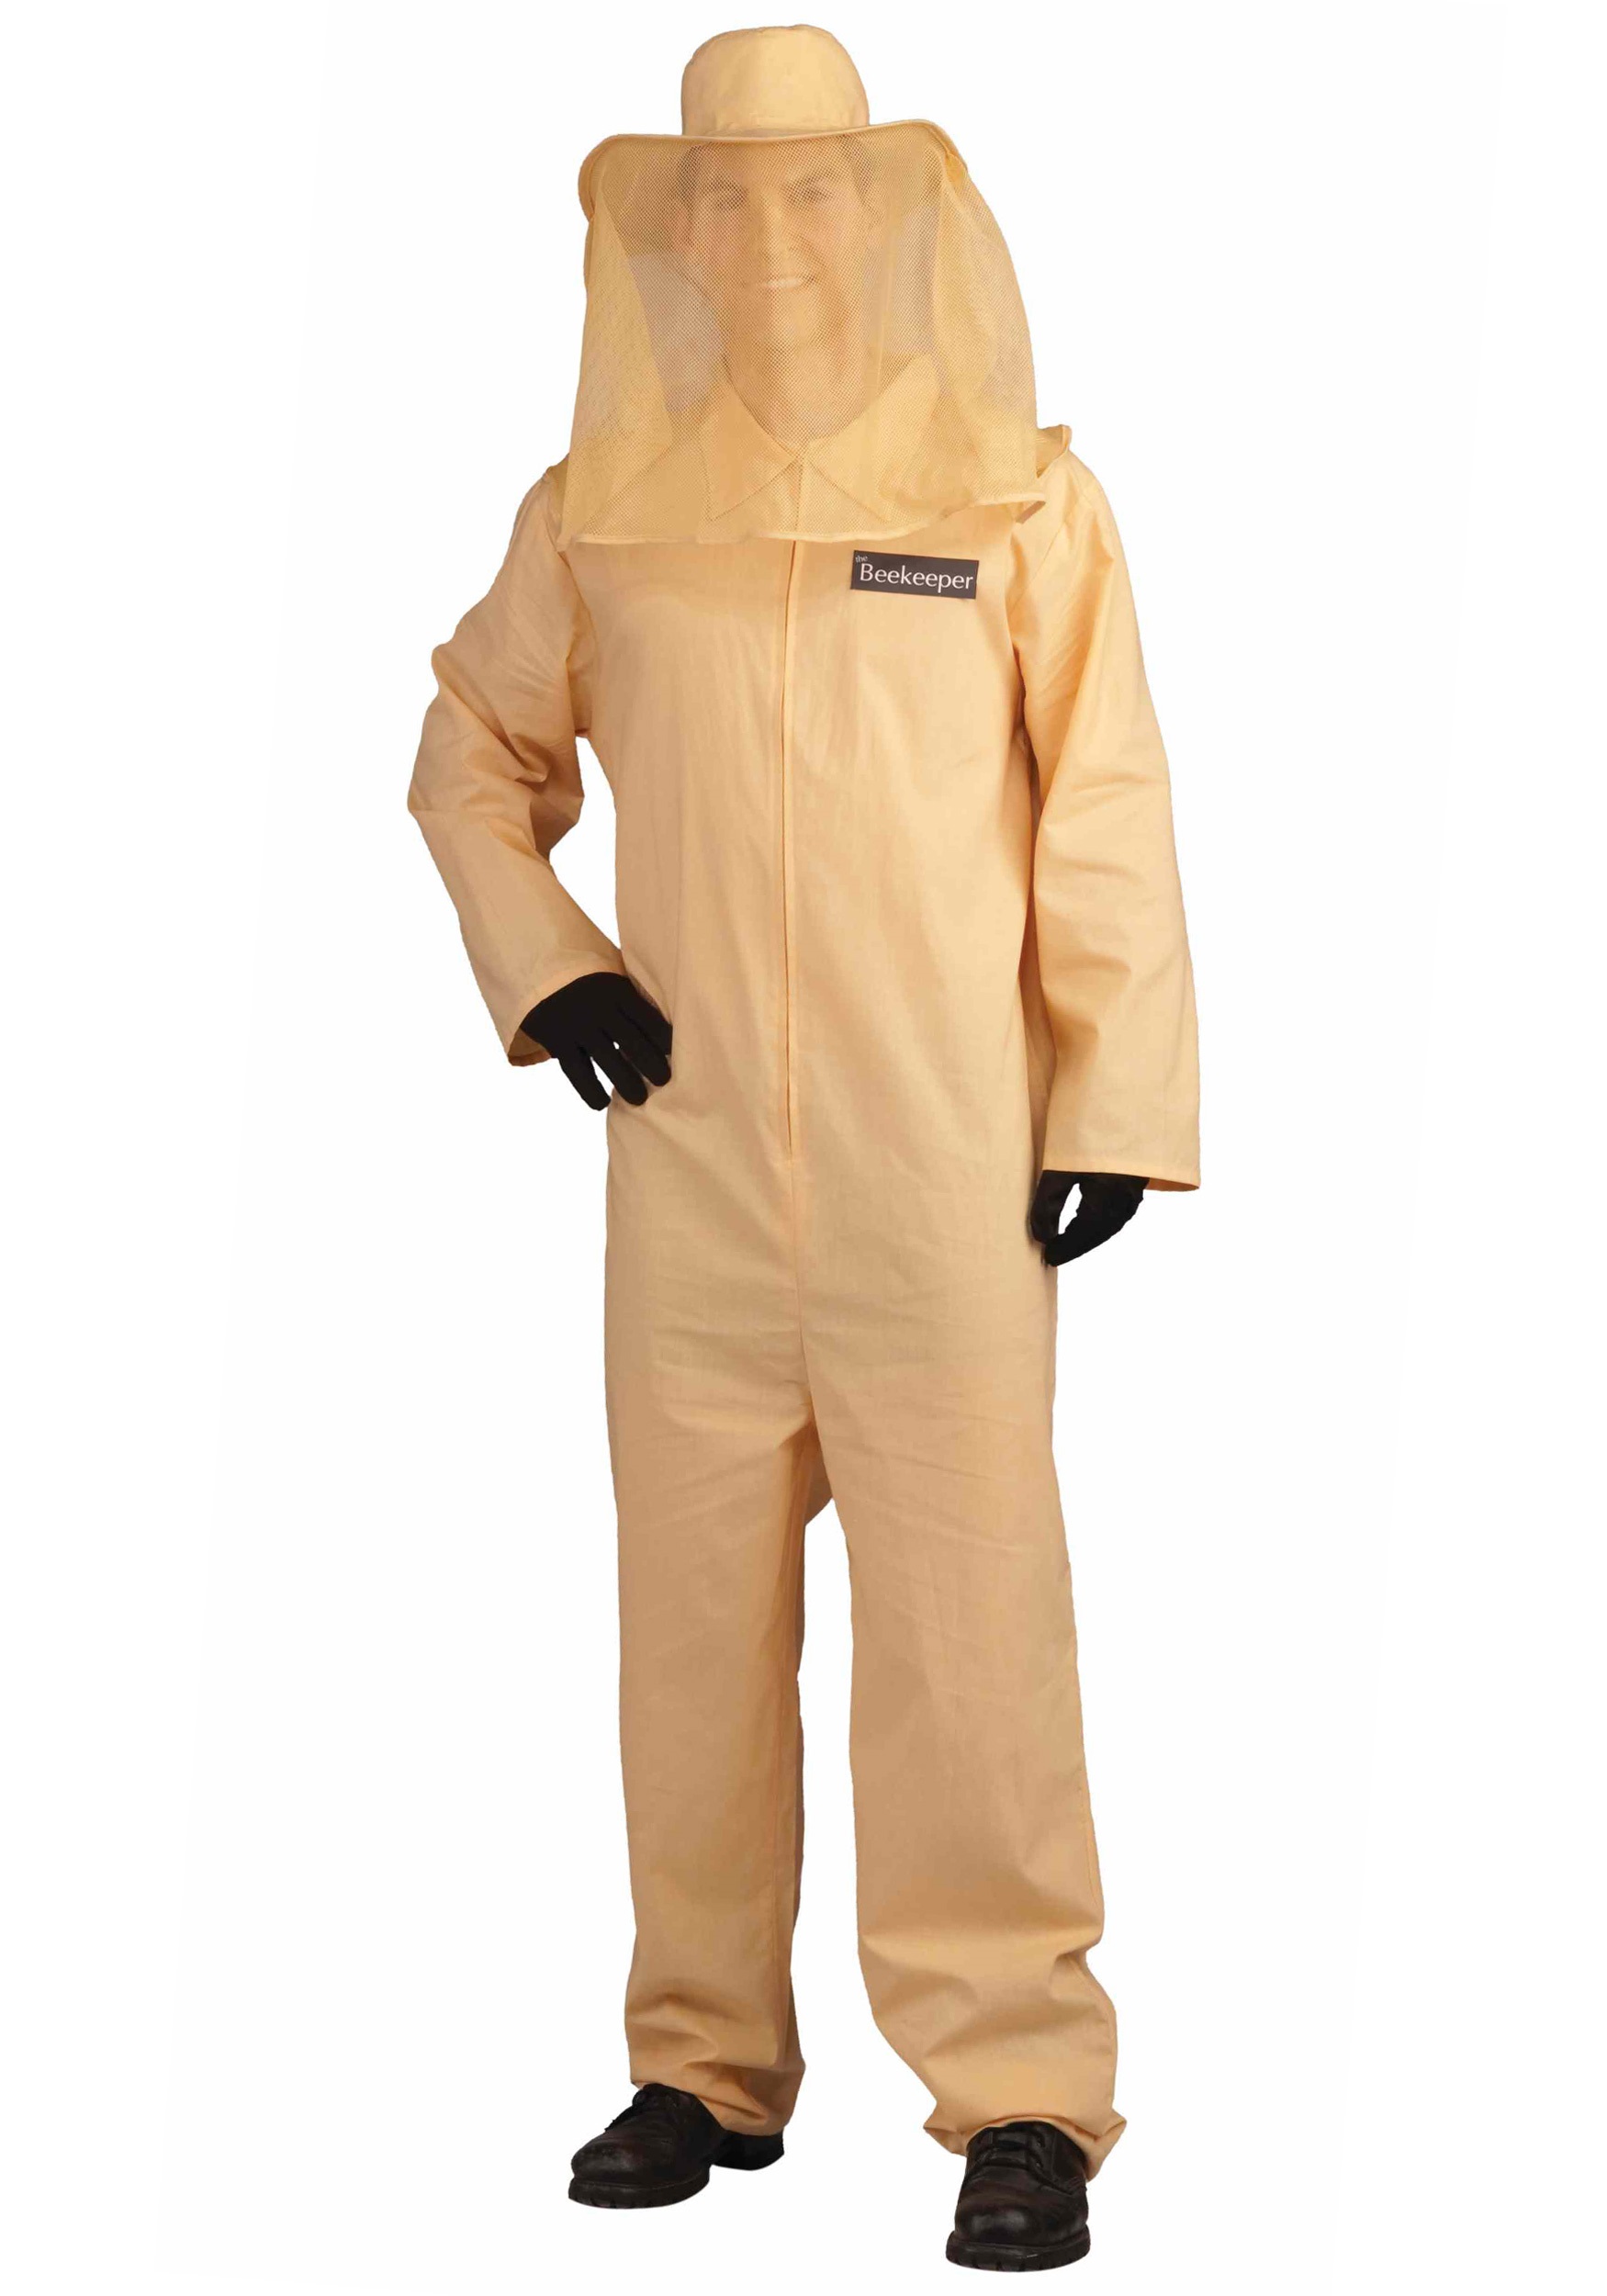 Adult Bee Keeper Costume,When Are Figs In Season In Florida